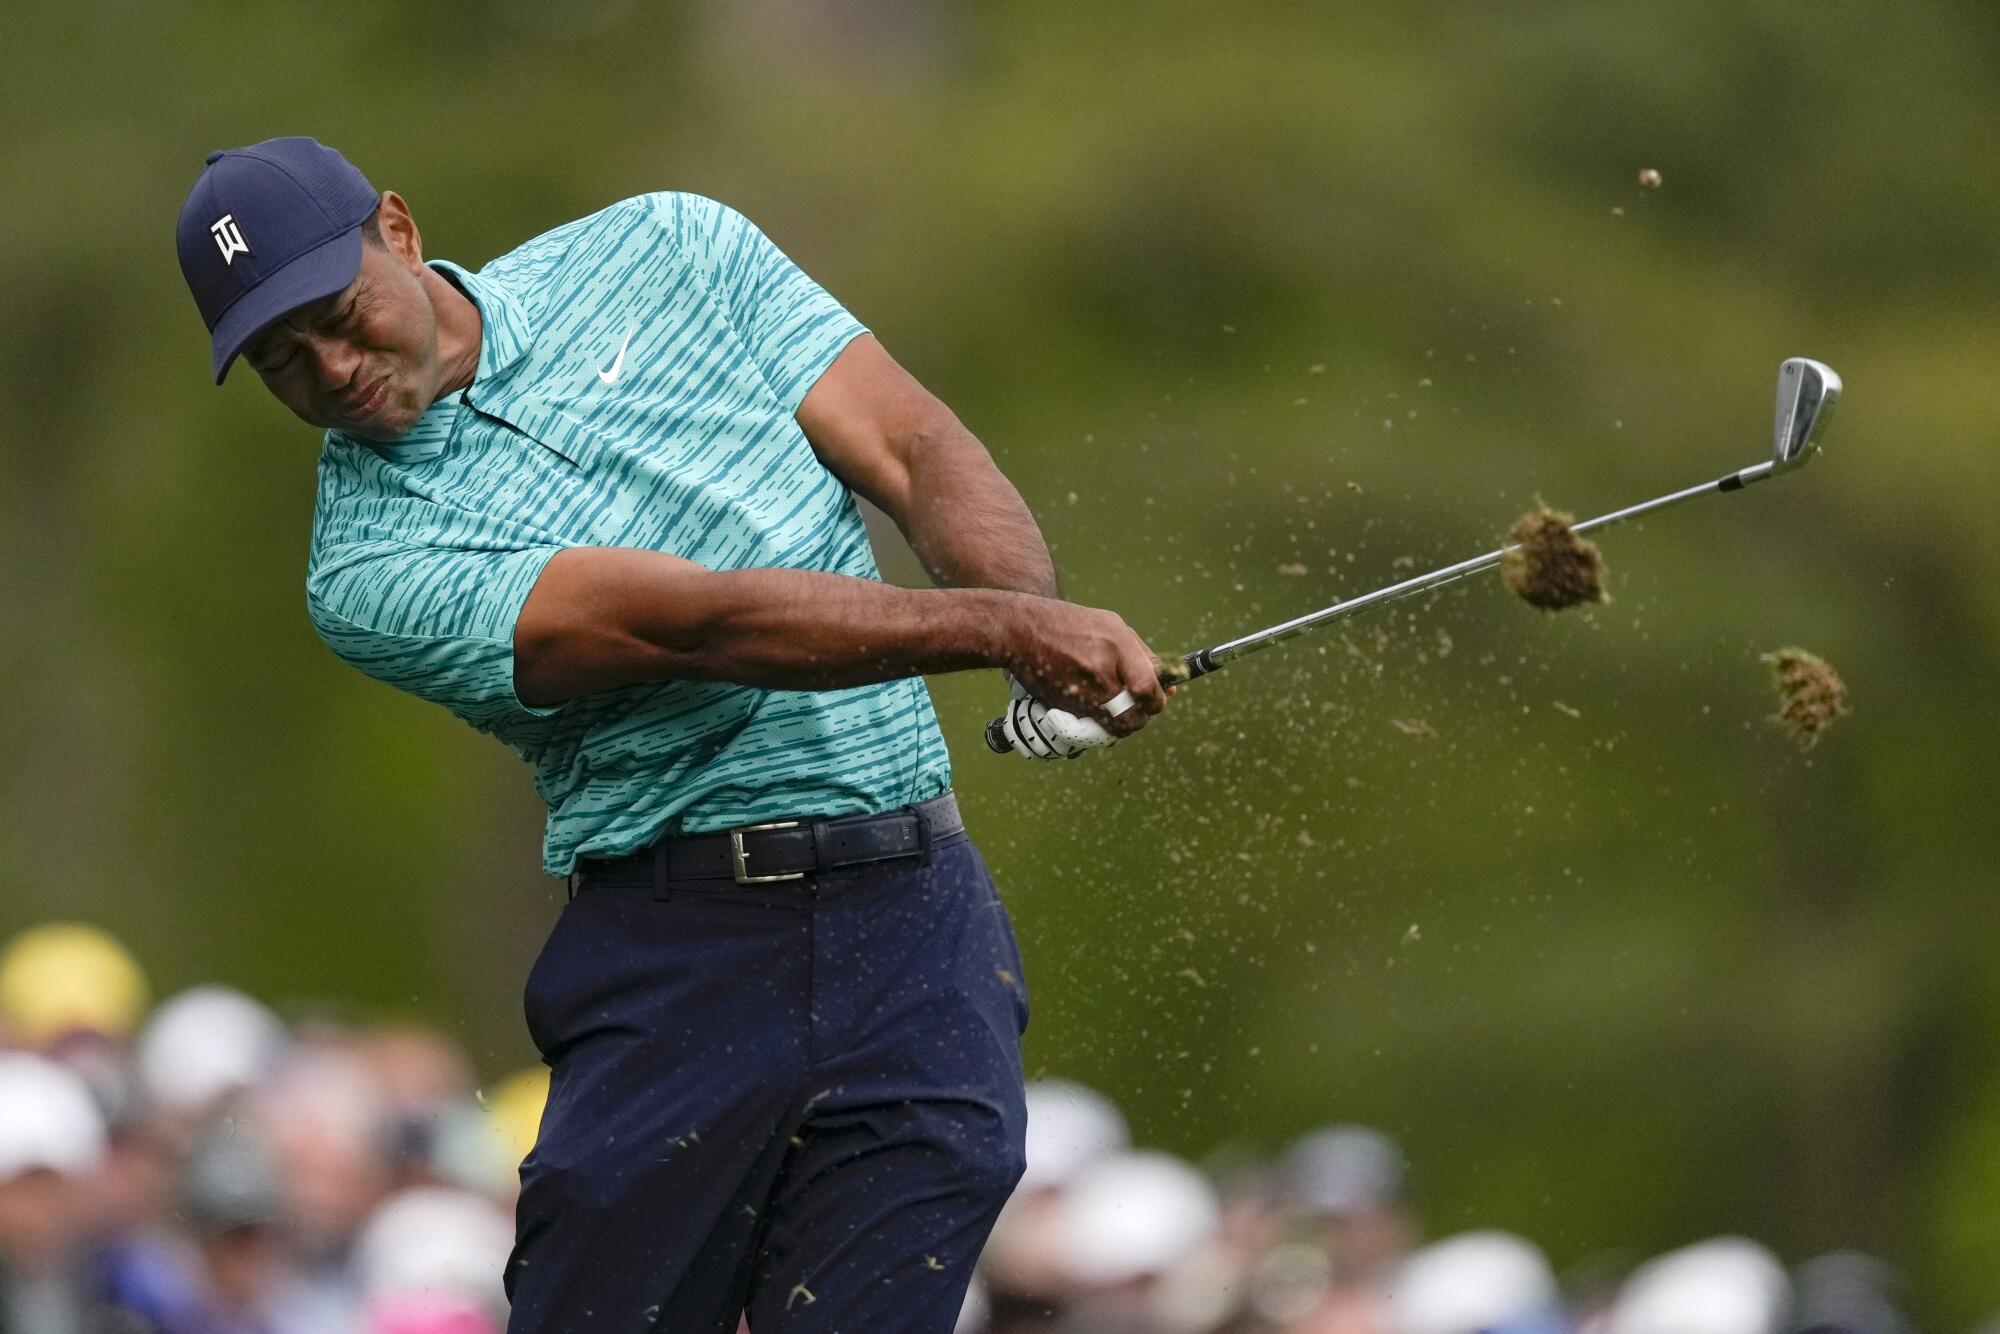 Tiger Woods hits on the 12th hole during the second round at the Masters golf tournament.